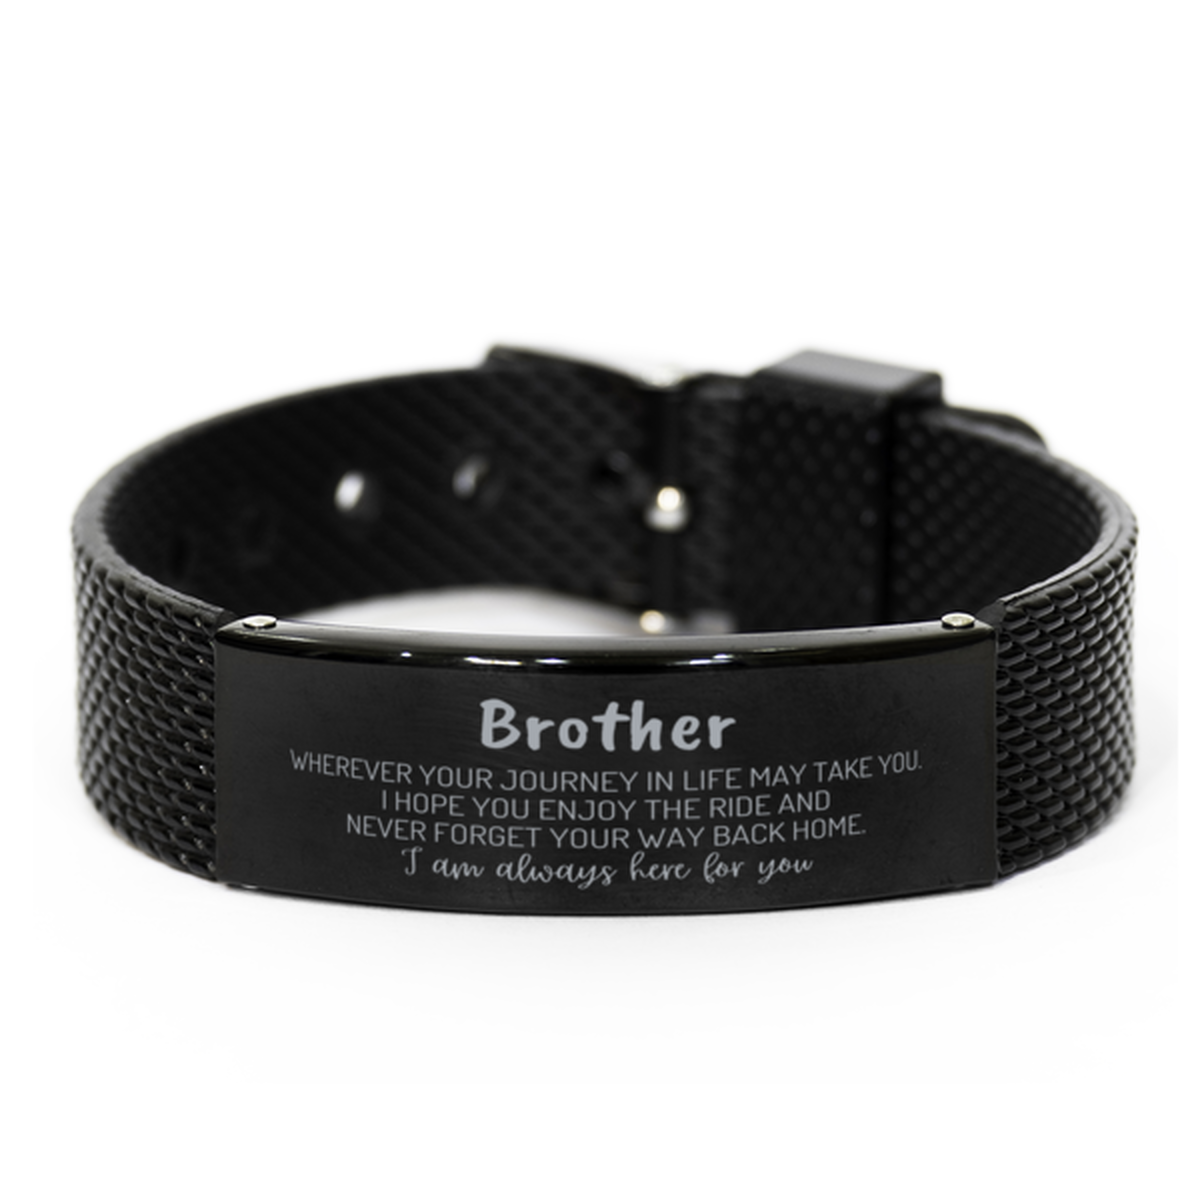 Brother wherever your journey in life may take you, I am always here for you Brother Black Shark Mesh Bracelet, Awesome Christmas Gifts For Brother, Brother Birthday Gifts for Men Women Family Loved One